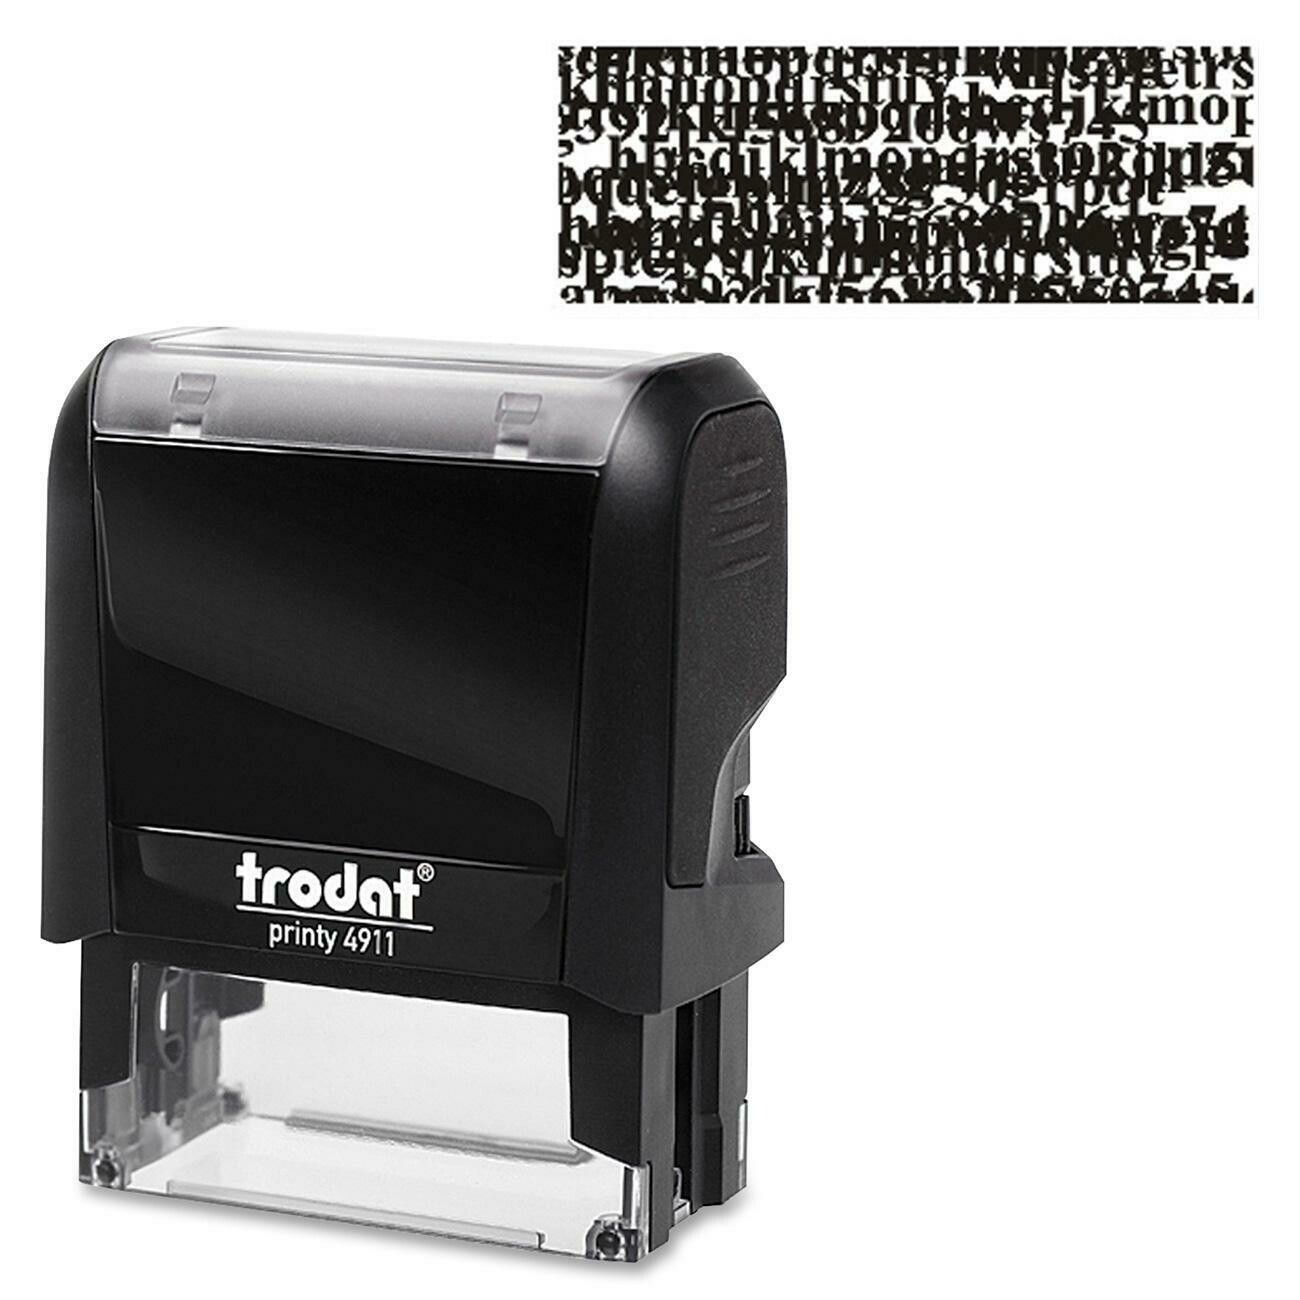 Trodat Printy 4911 Self-Inking I.D. Protection Stamp